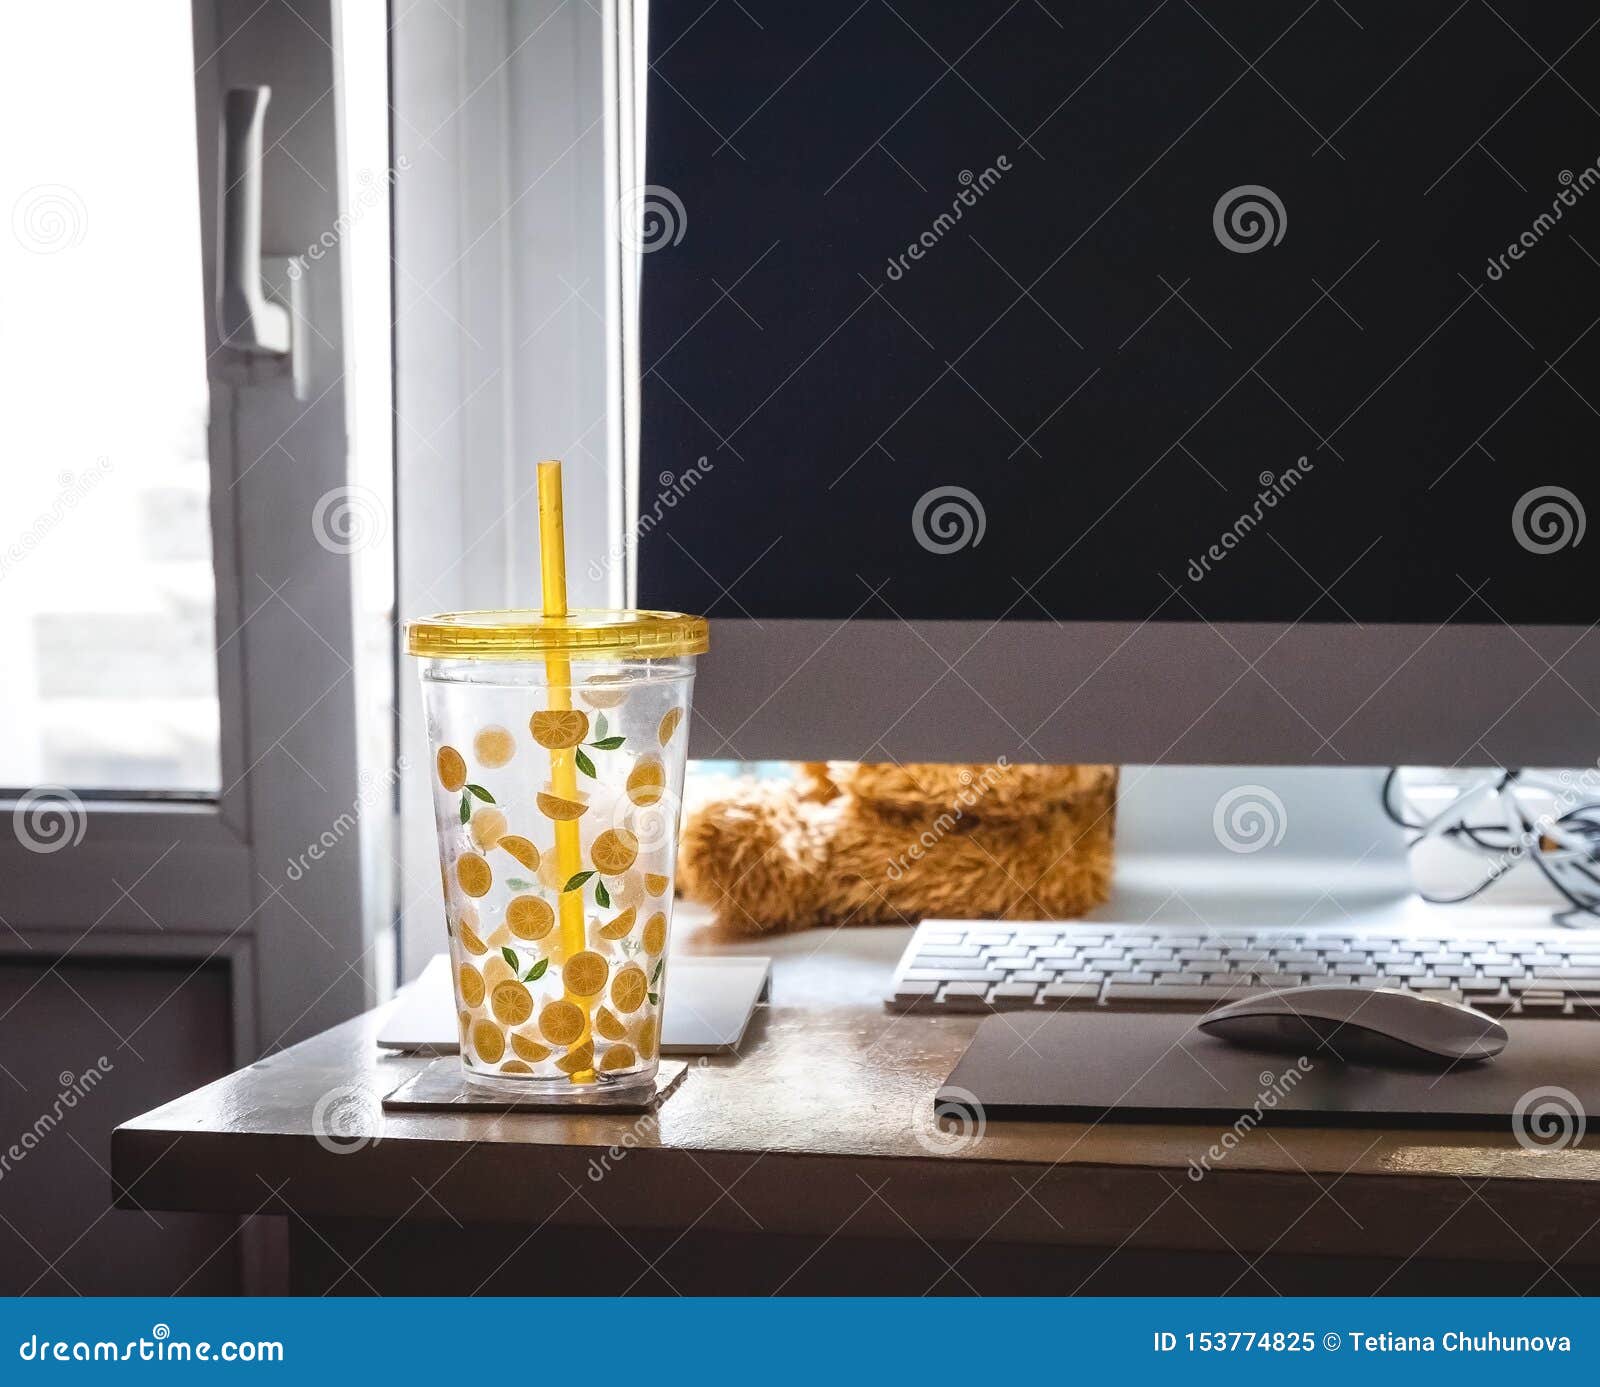 A Glass With A Straw With Painted Lemons On The Desk Of The Home